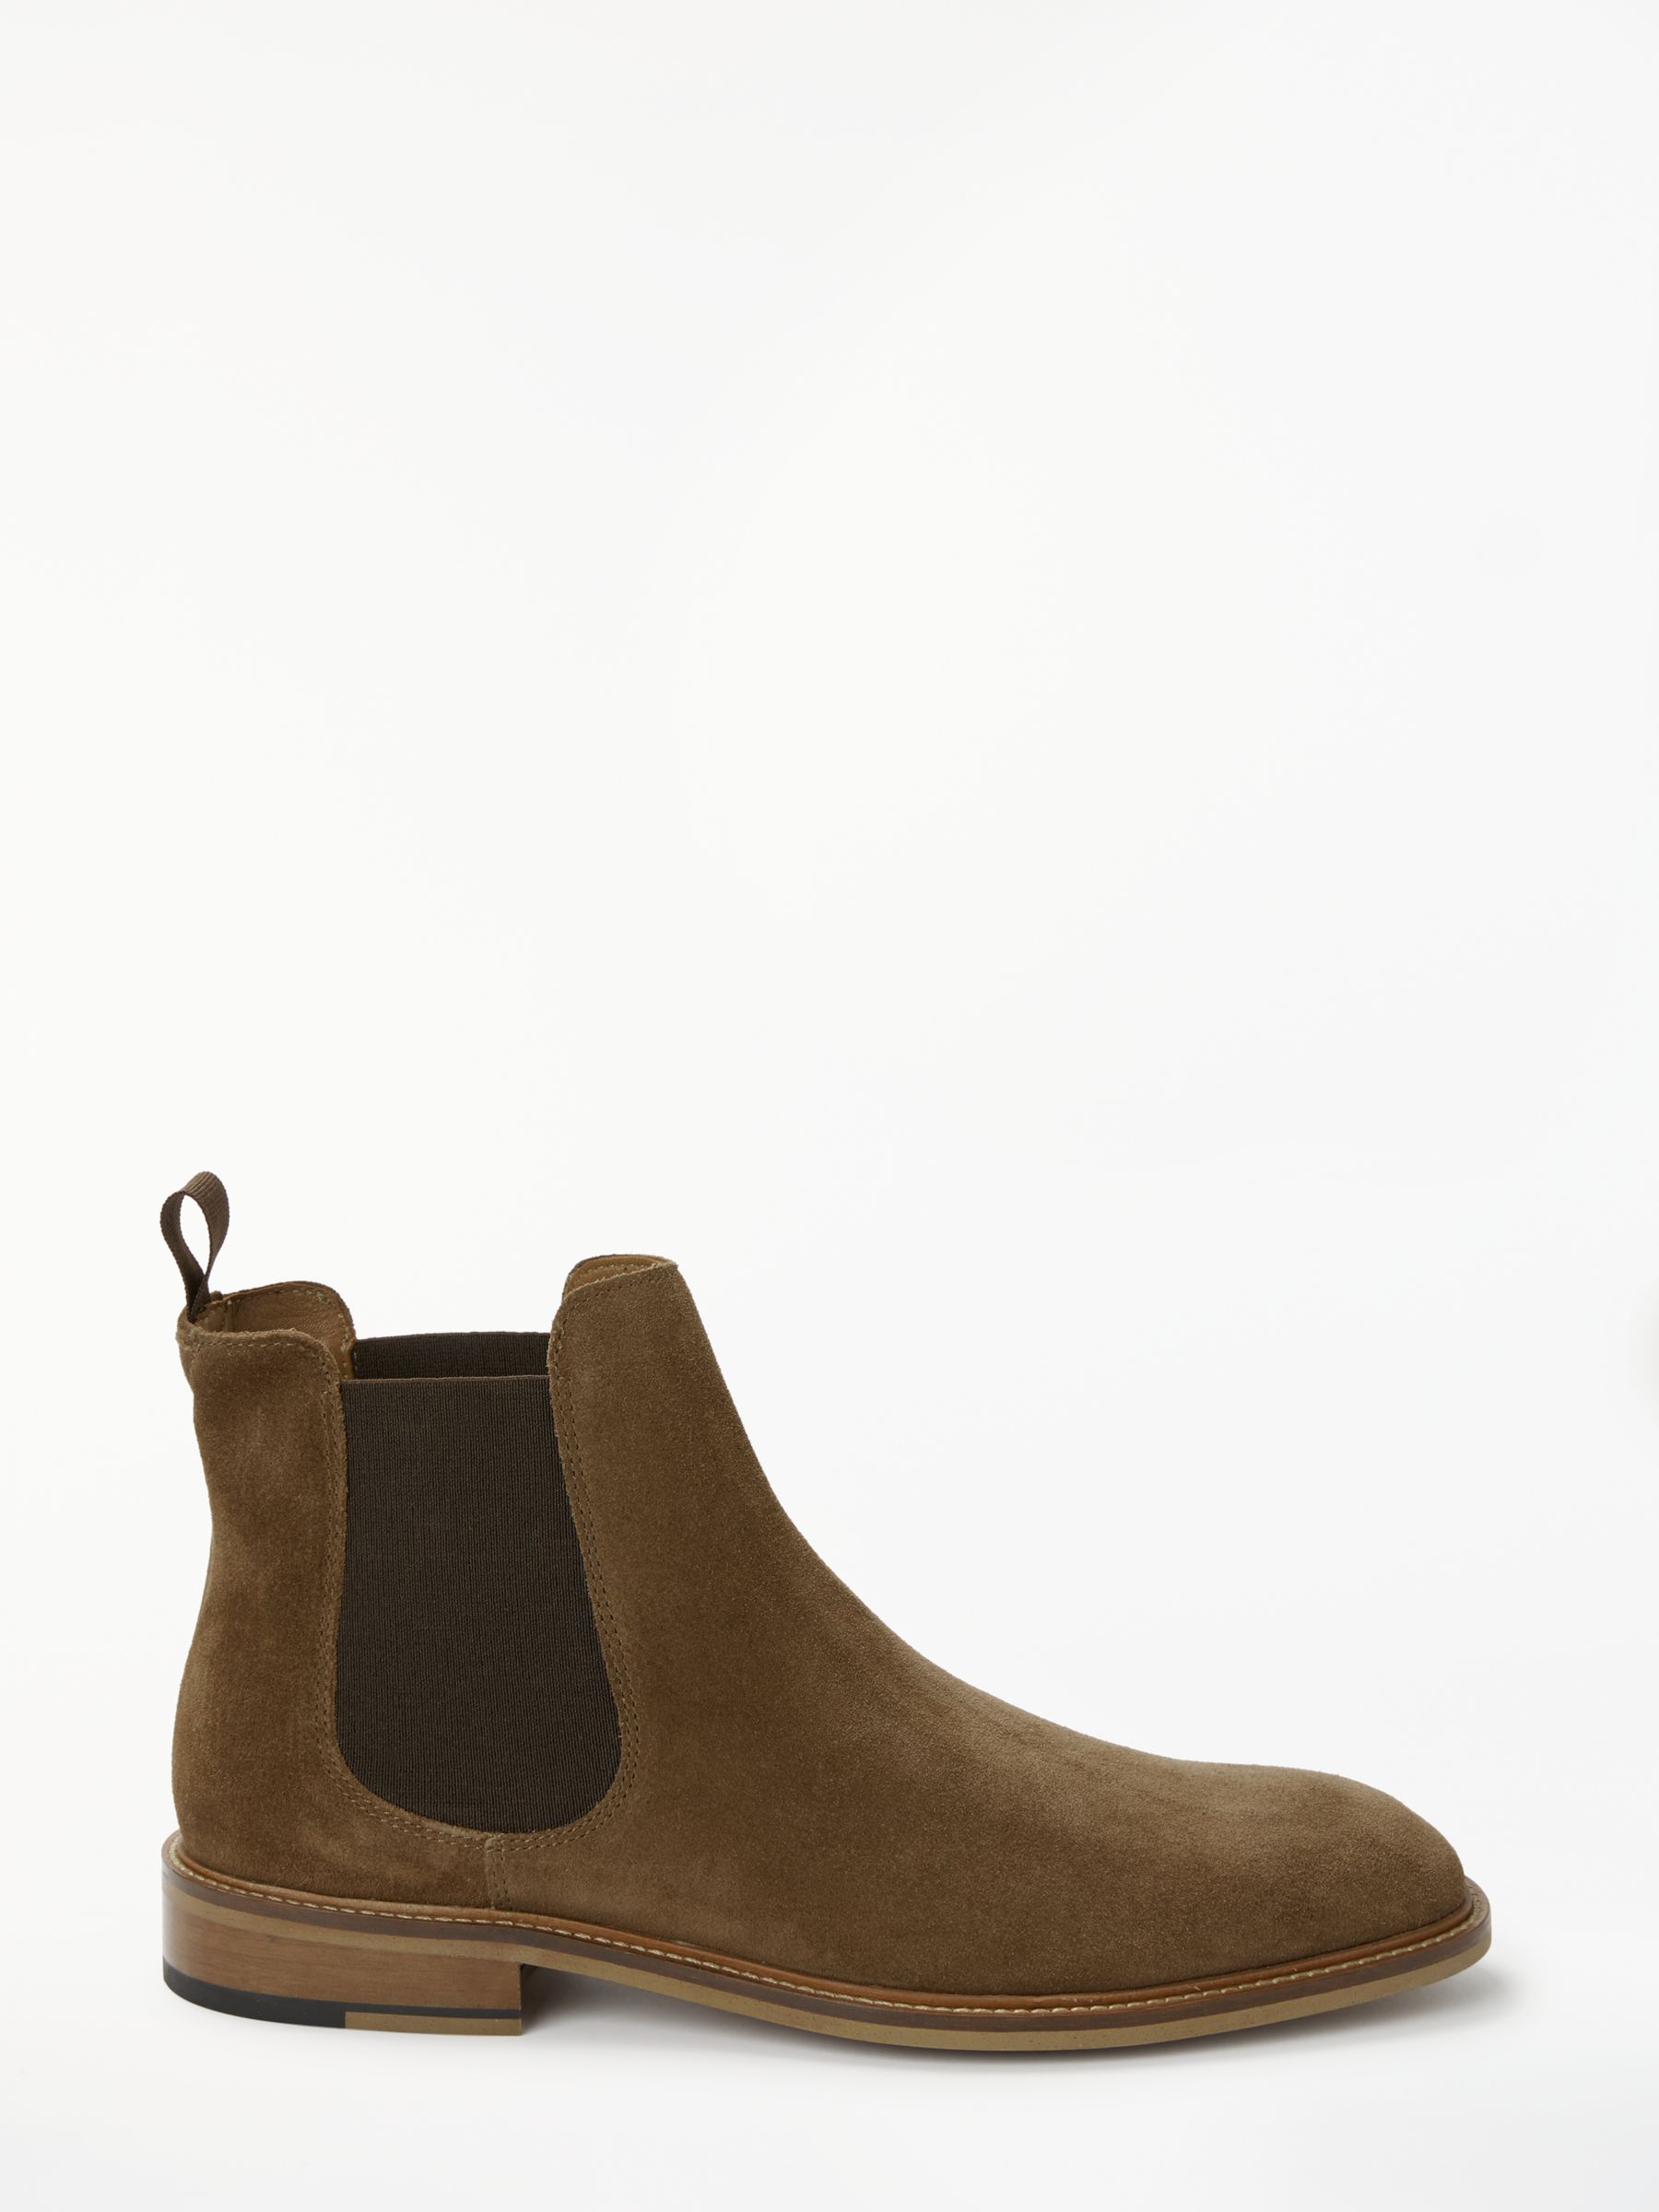 John Lewis & Partners Chester Chelsea Boots, Brown